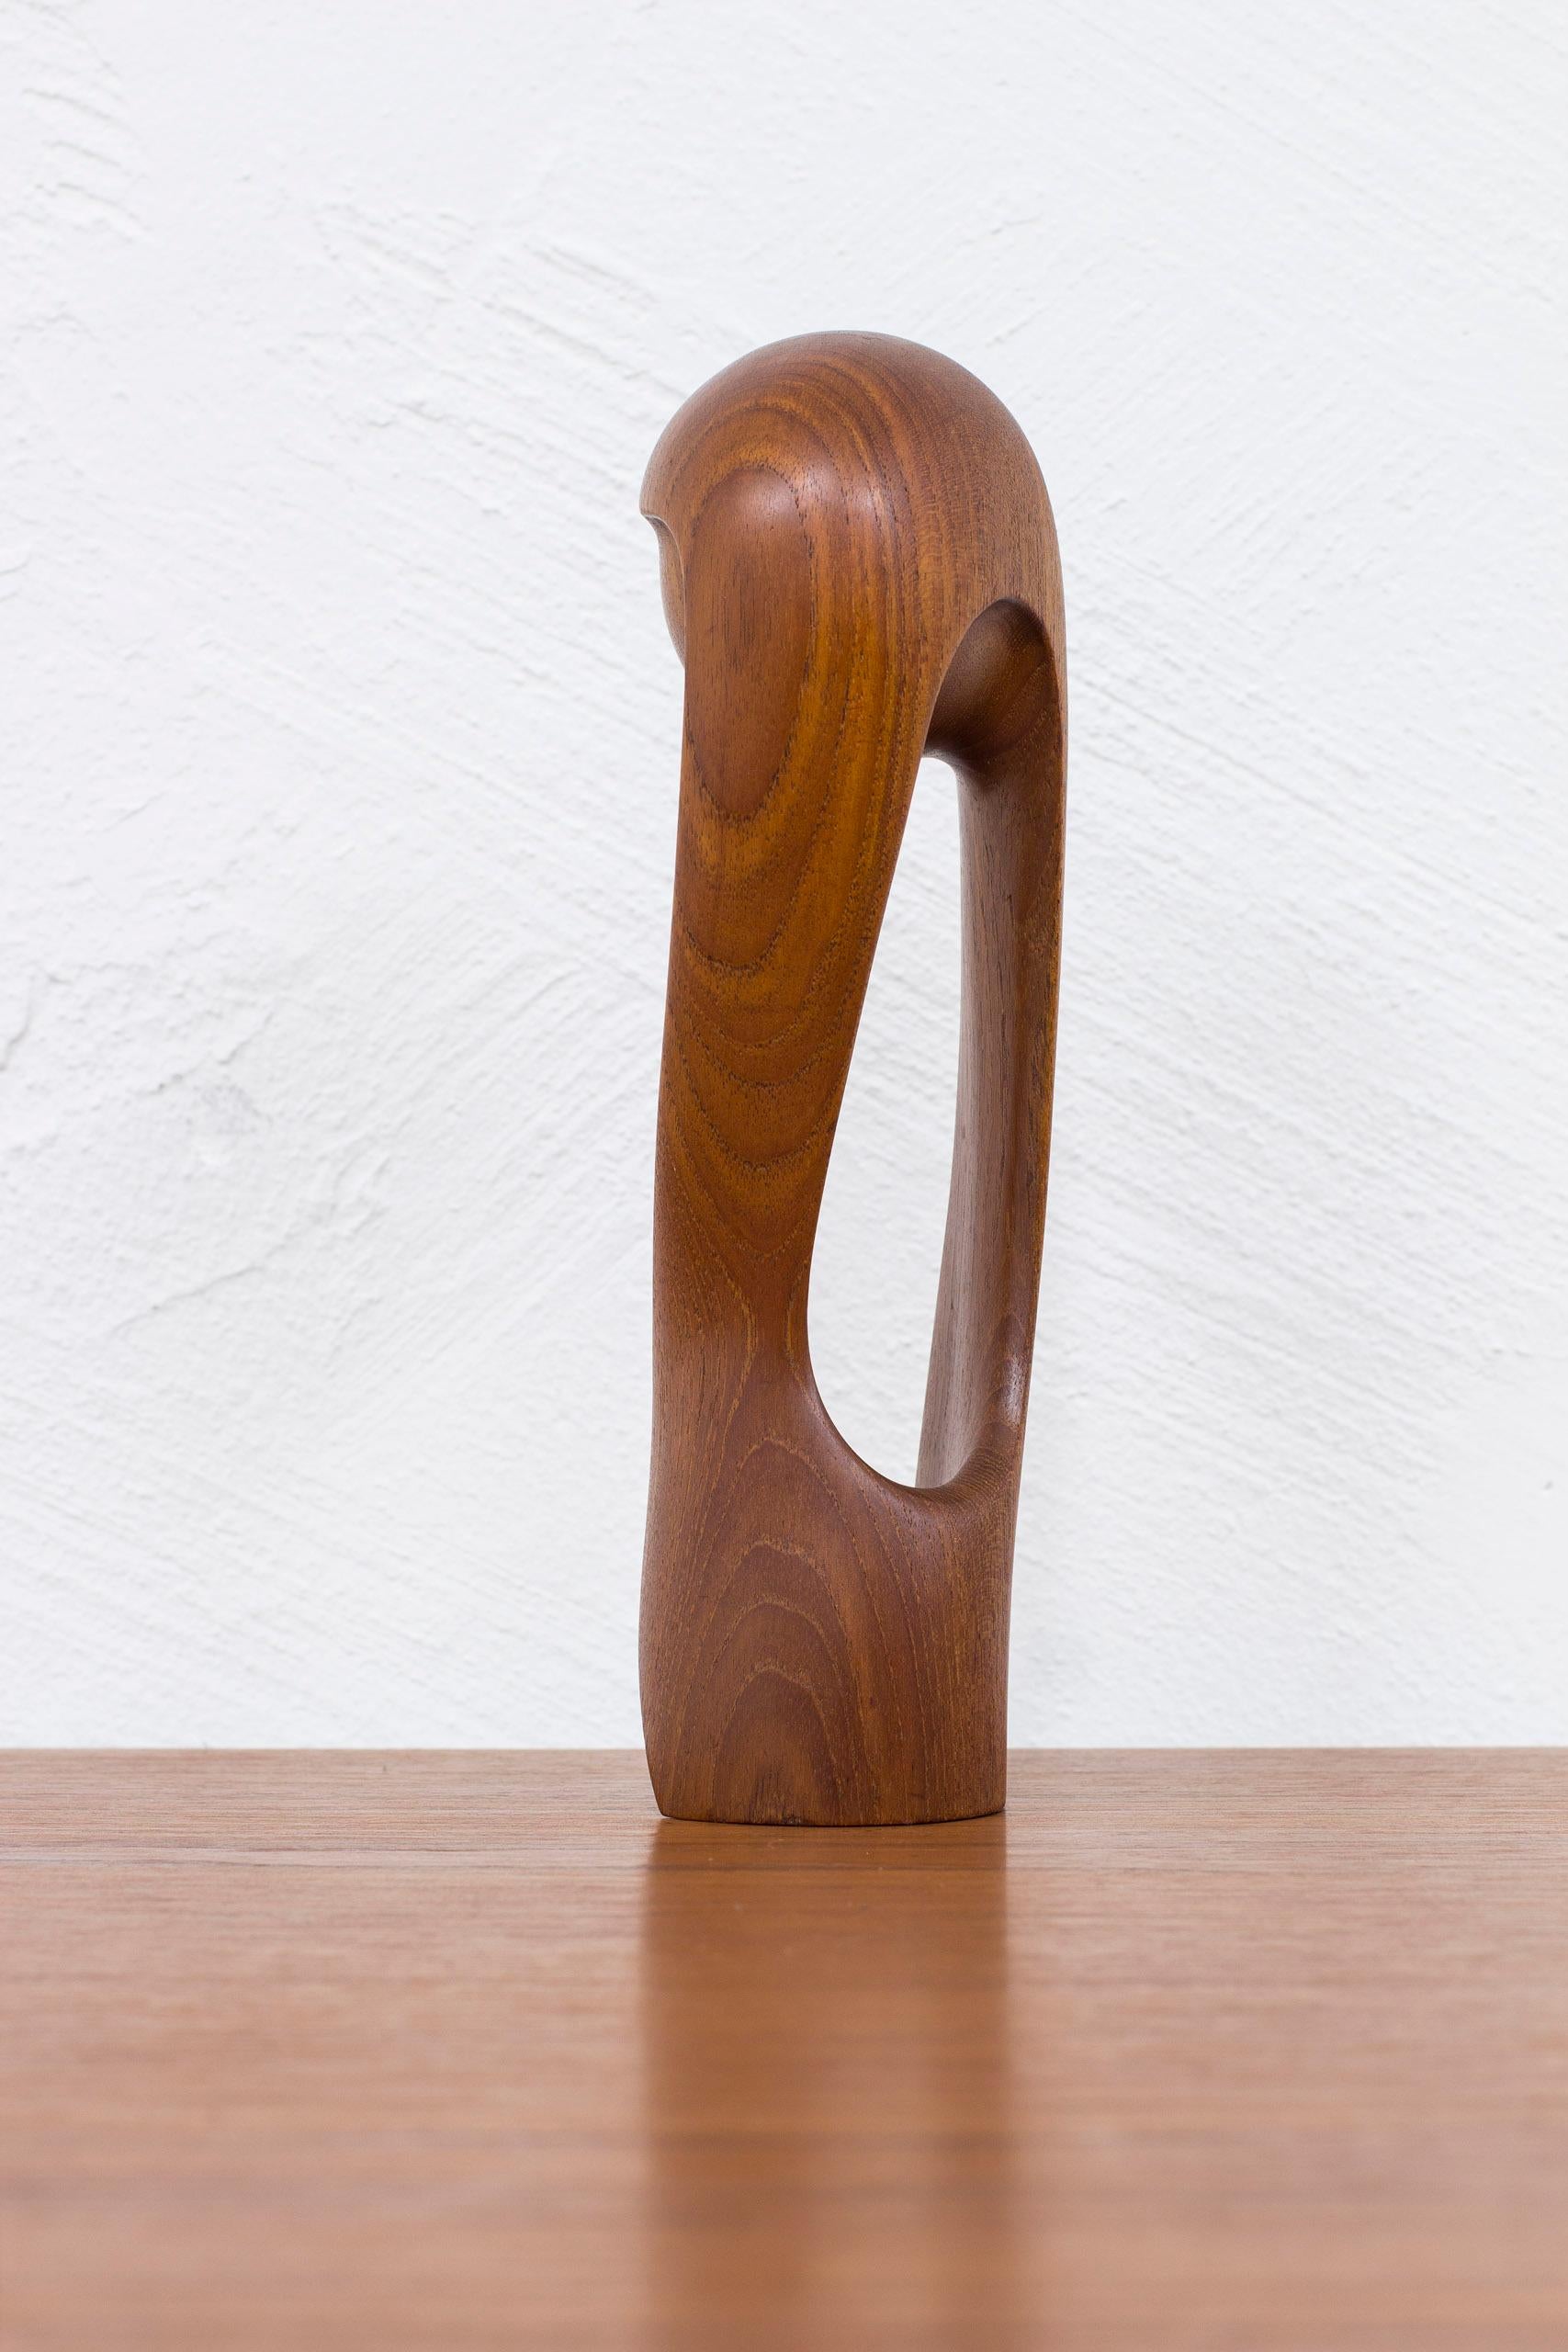 Mid-20th Century Teak Sculpture by Simon Randers, Produced in Denmark During the, 1950s For Sale